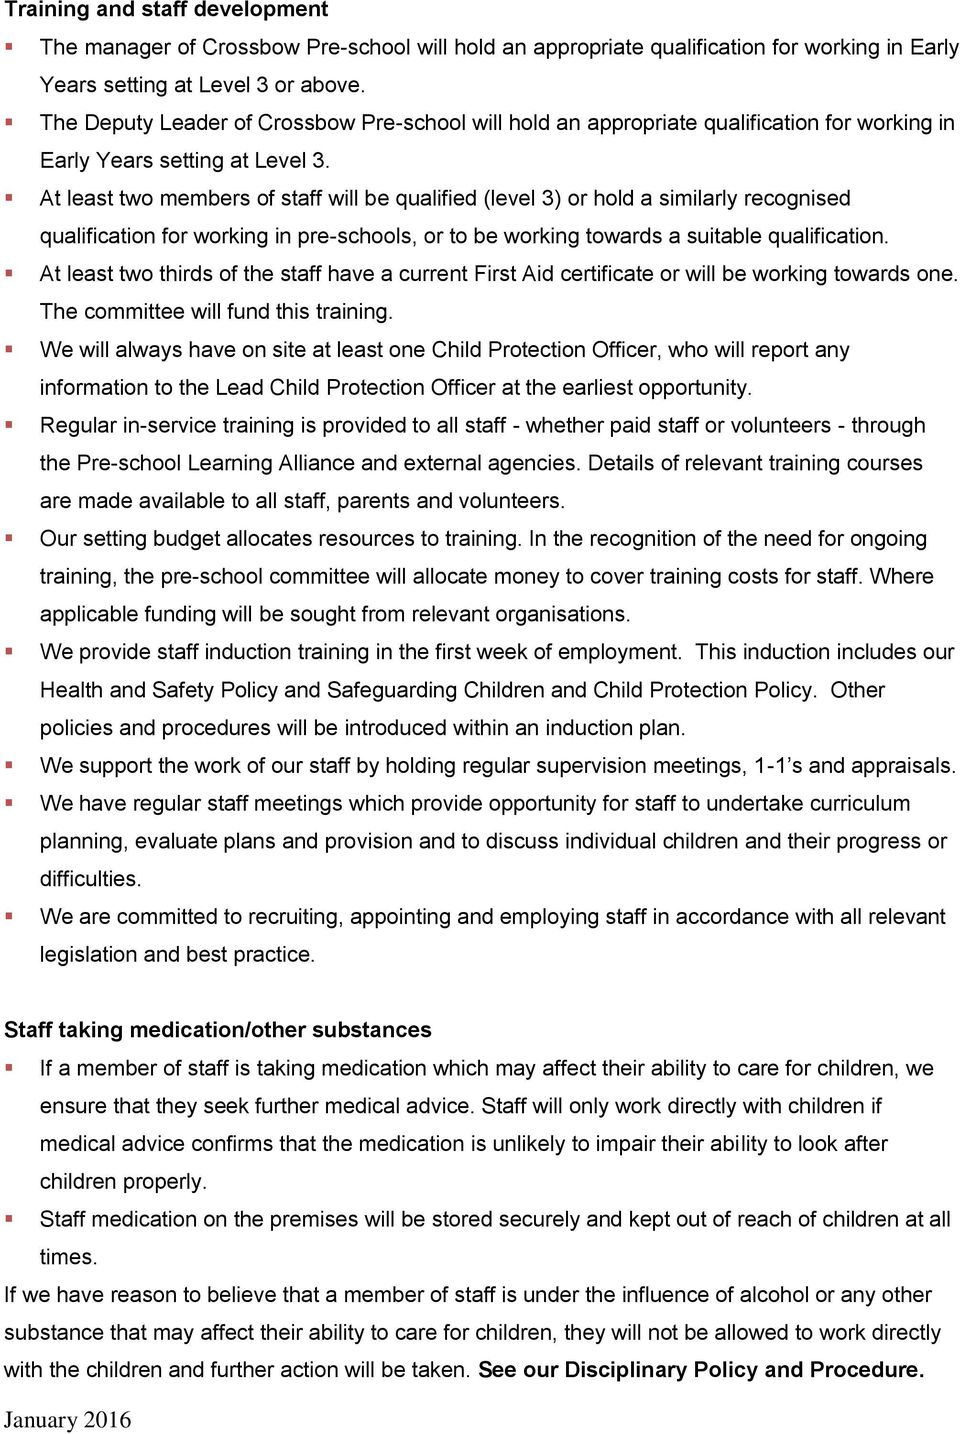 At least two members of staff will be qualified (level 3) or hold a similarly recognised qualification for working in pre-schools, or to be working towards a suitable qualification.